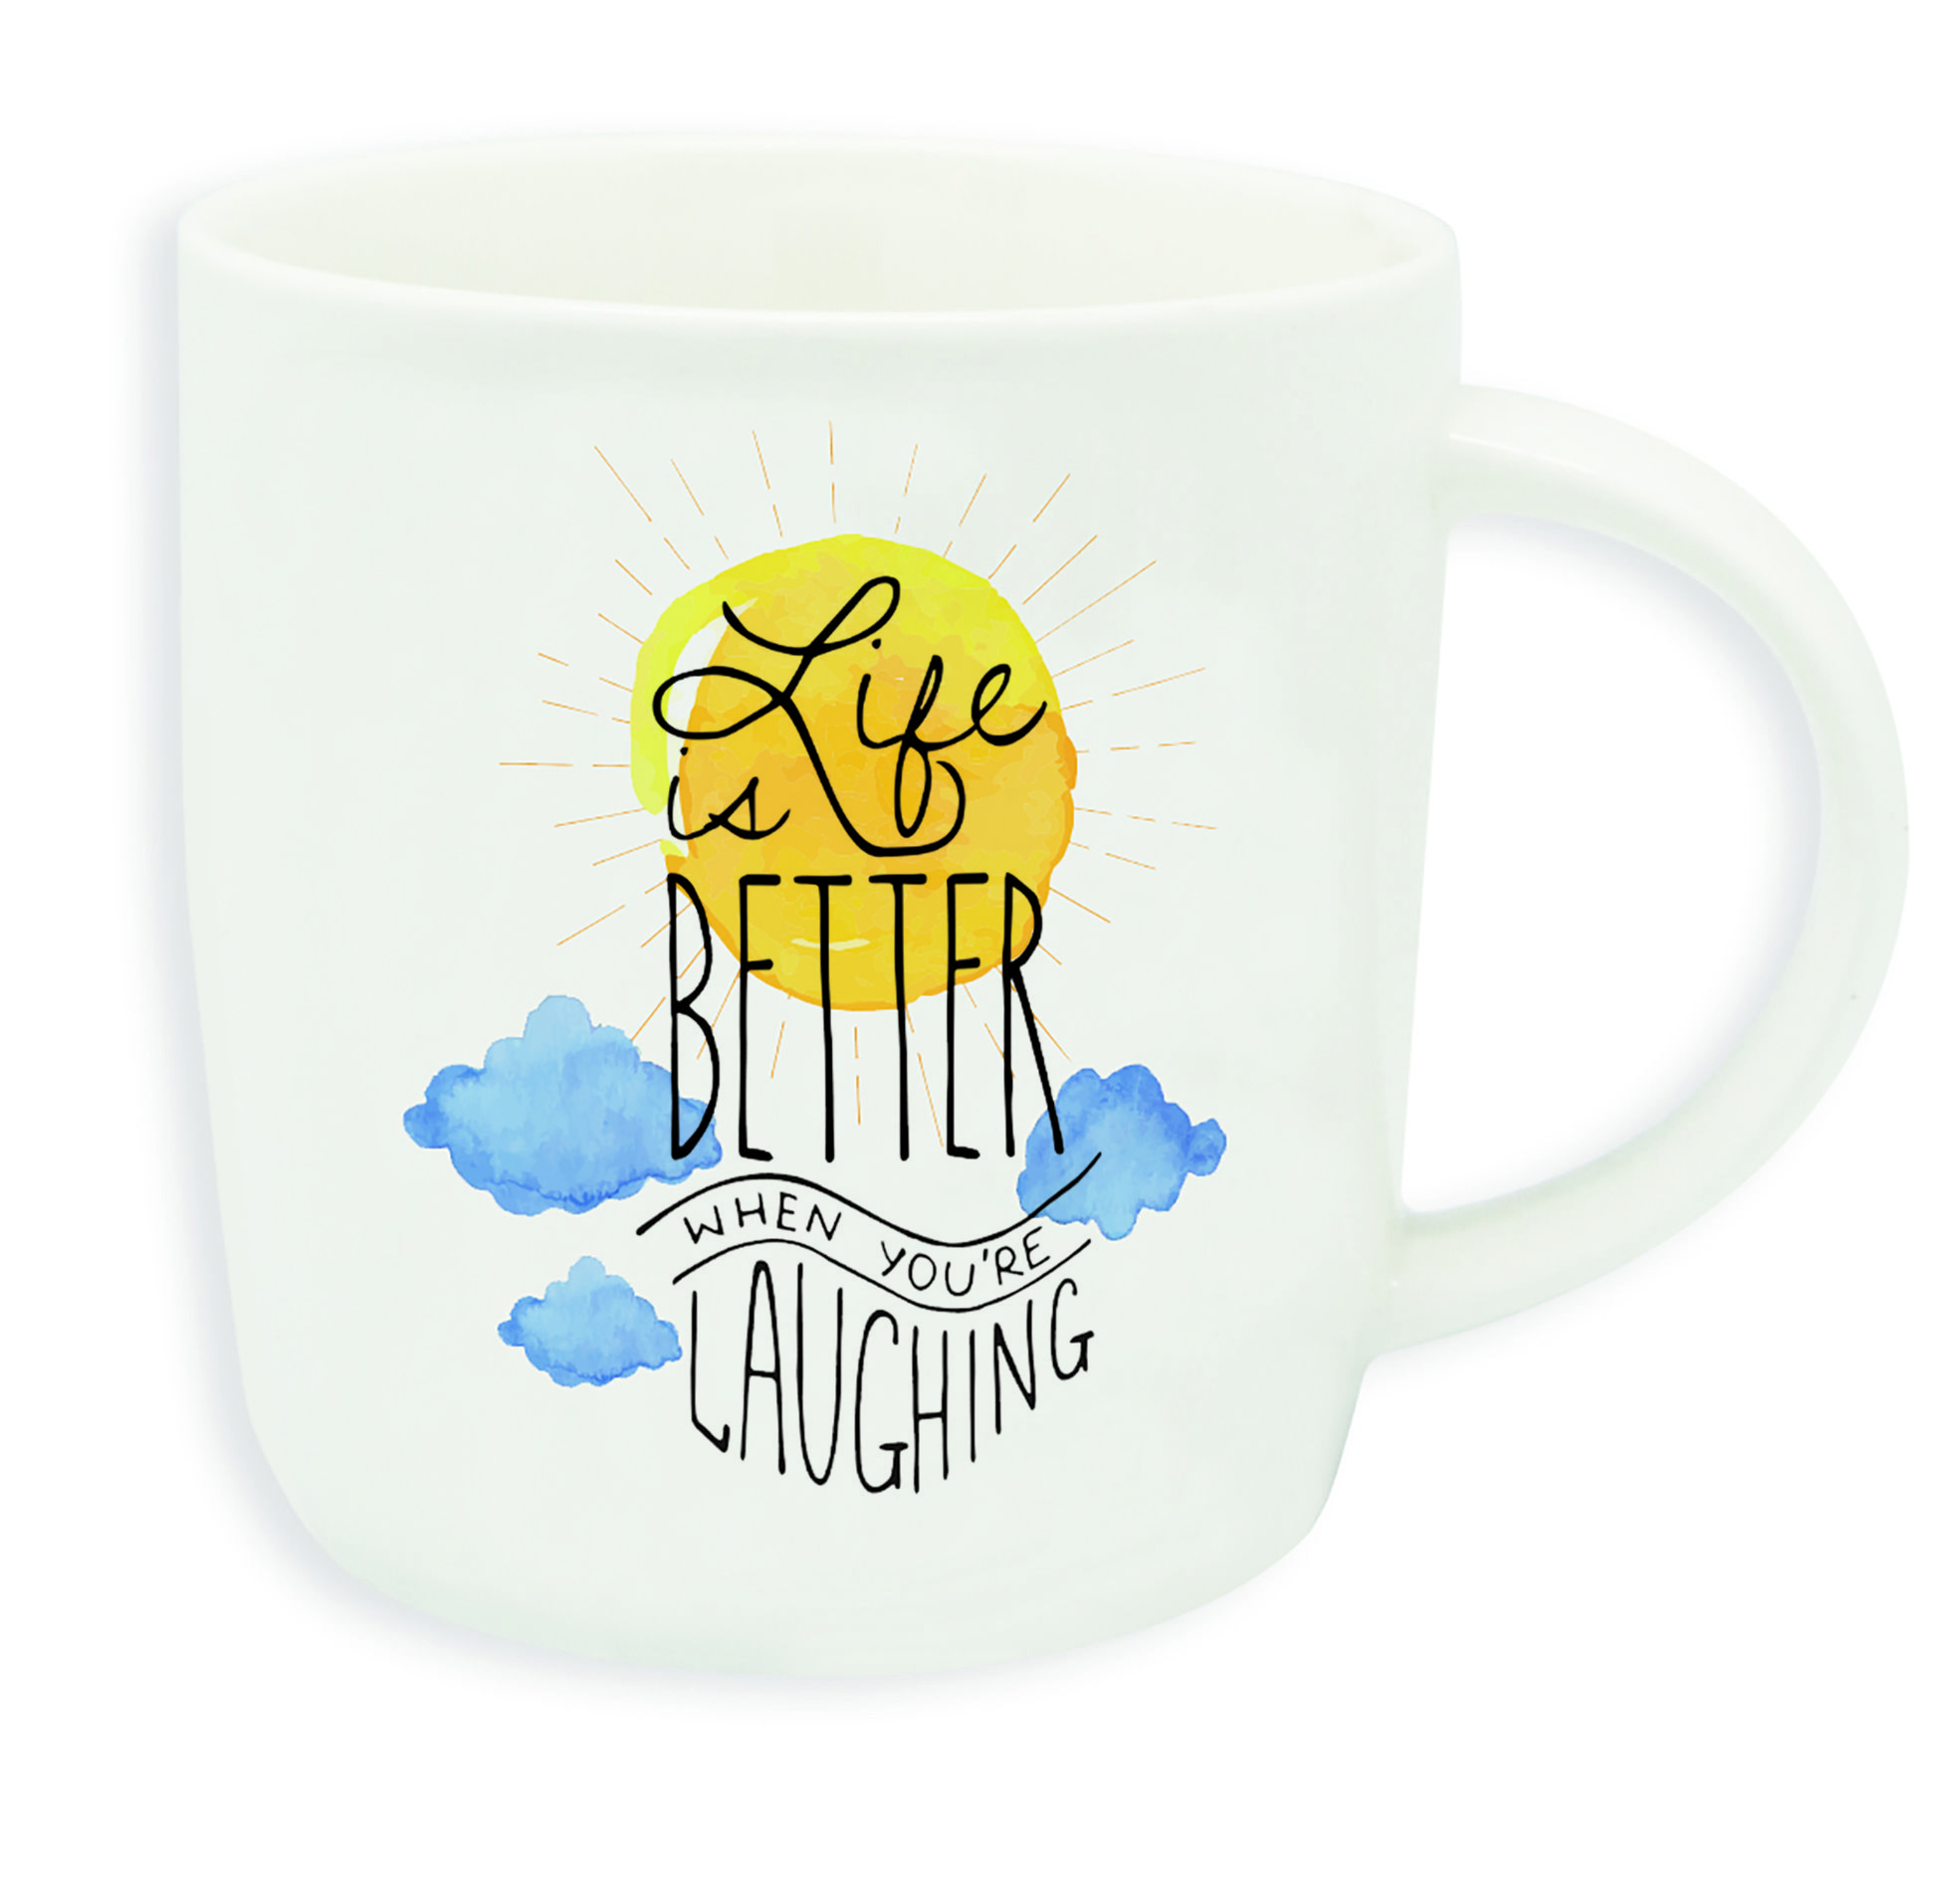 Cana - Aphorism - Life Is Better | Legami